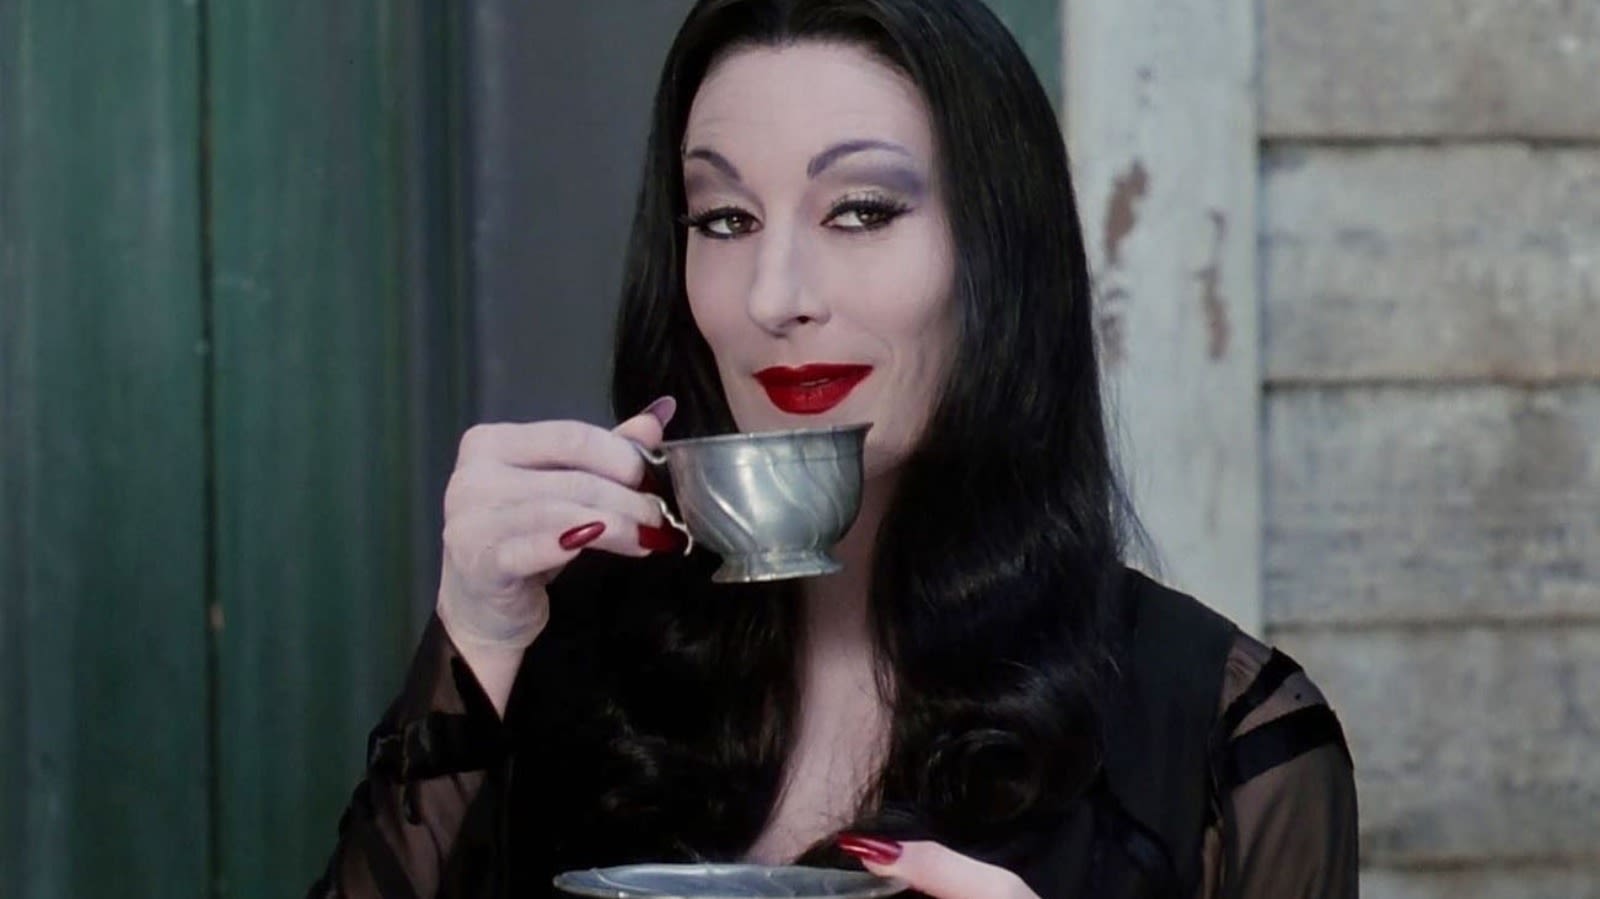 The Addams Family Put Anjelica Huston Through Intense And Restrictive Conditions - SlashFilm